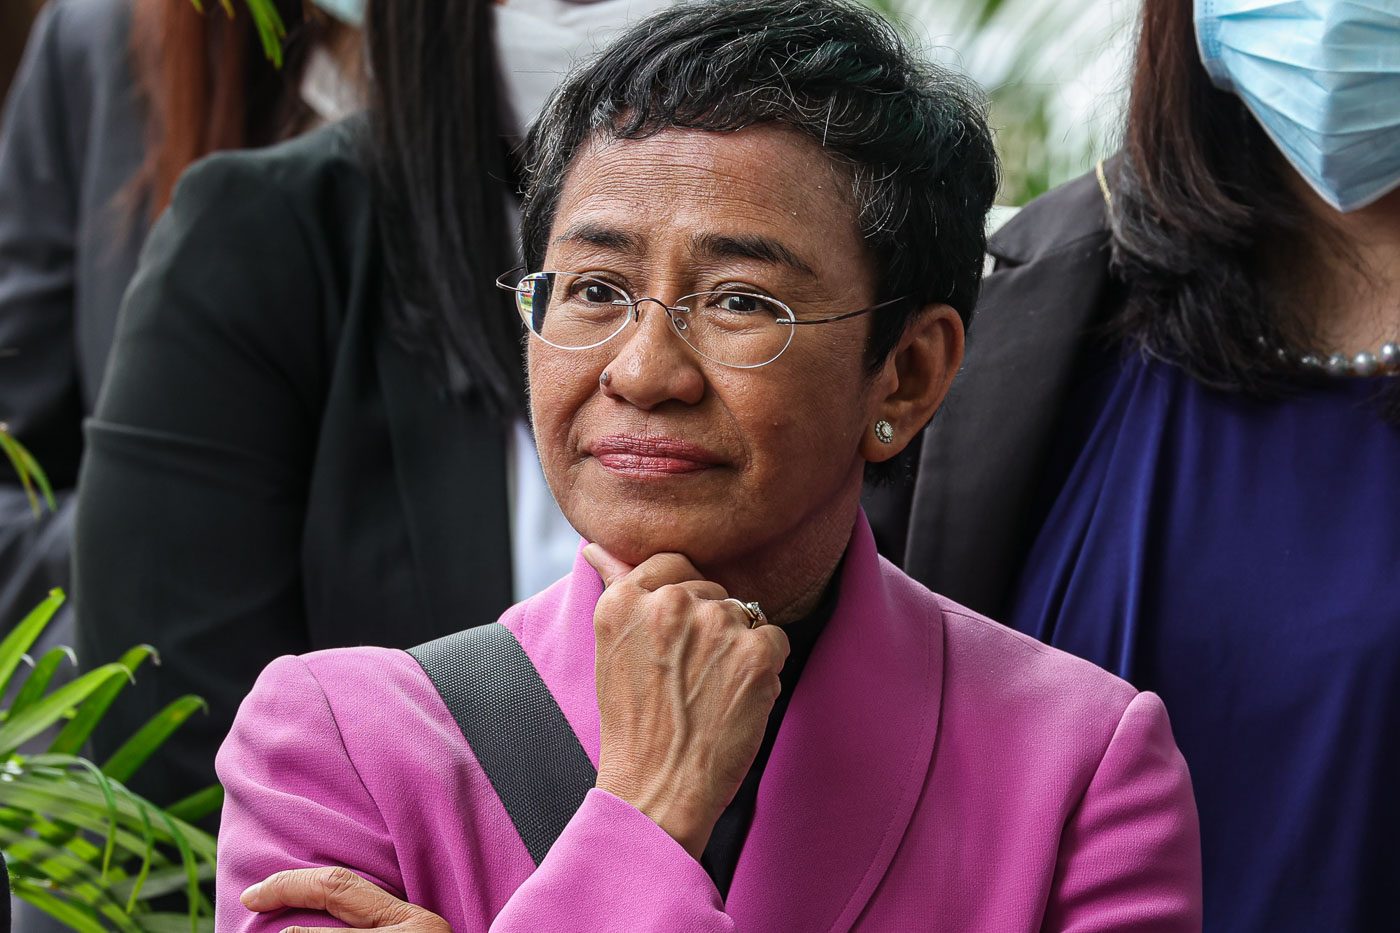 Maria Ressa on tax evasion acquittal: ‘Today, facts win, truth wins, justice wins’